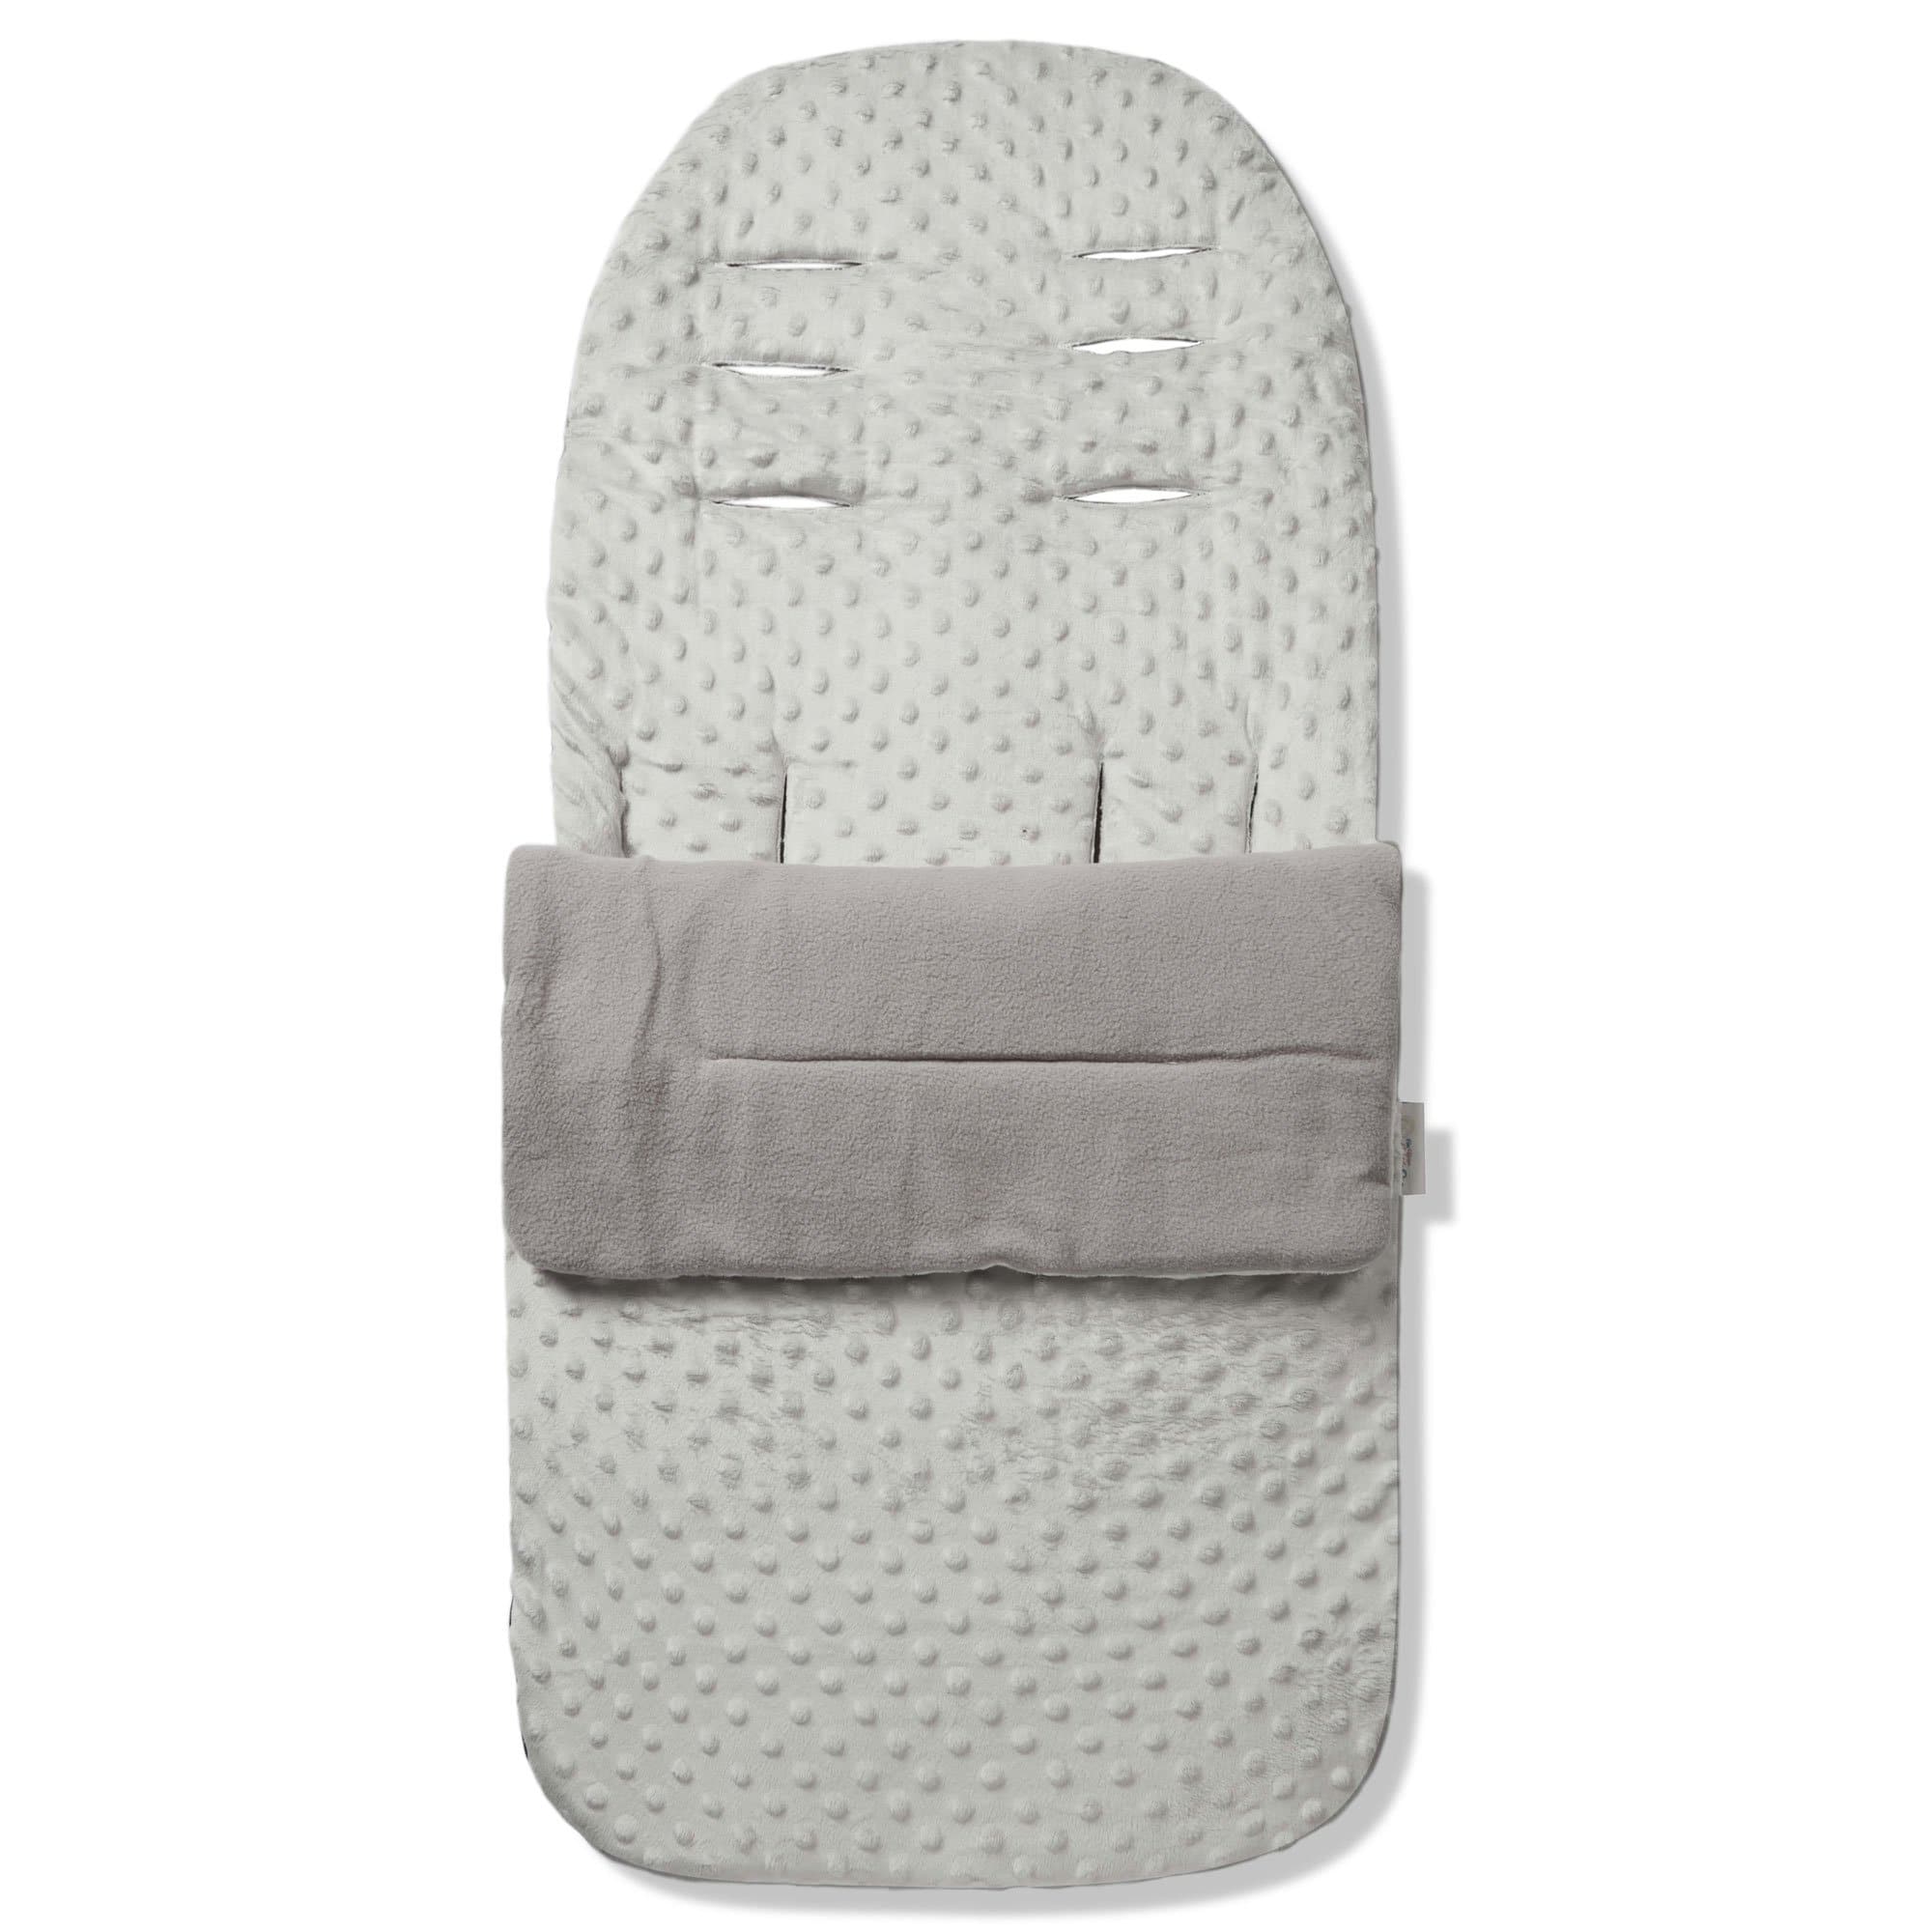 Dimple Footmuff / Cosy Toes Compatible with Graco - Grey / Fits All Models | For Your Little One